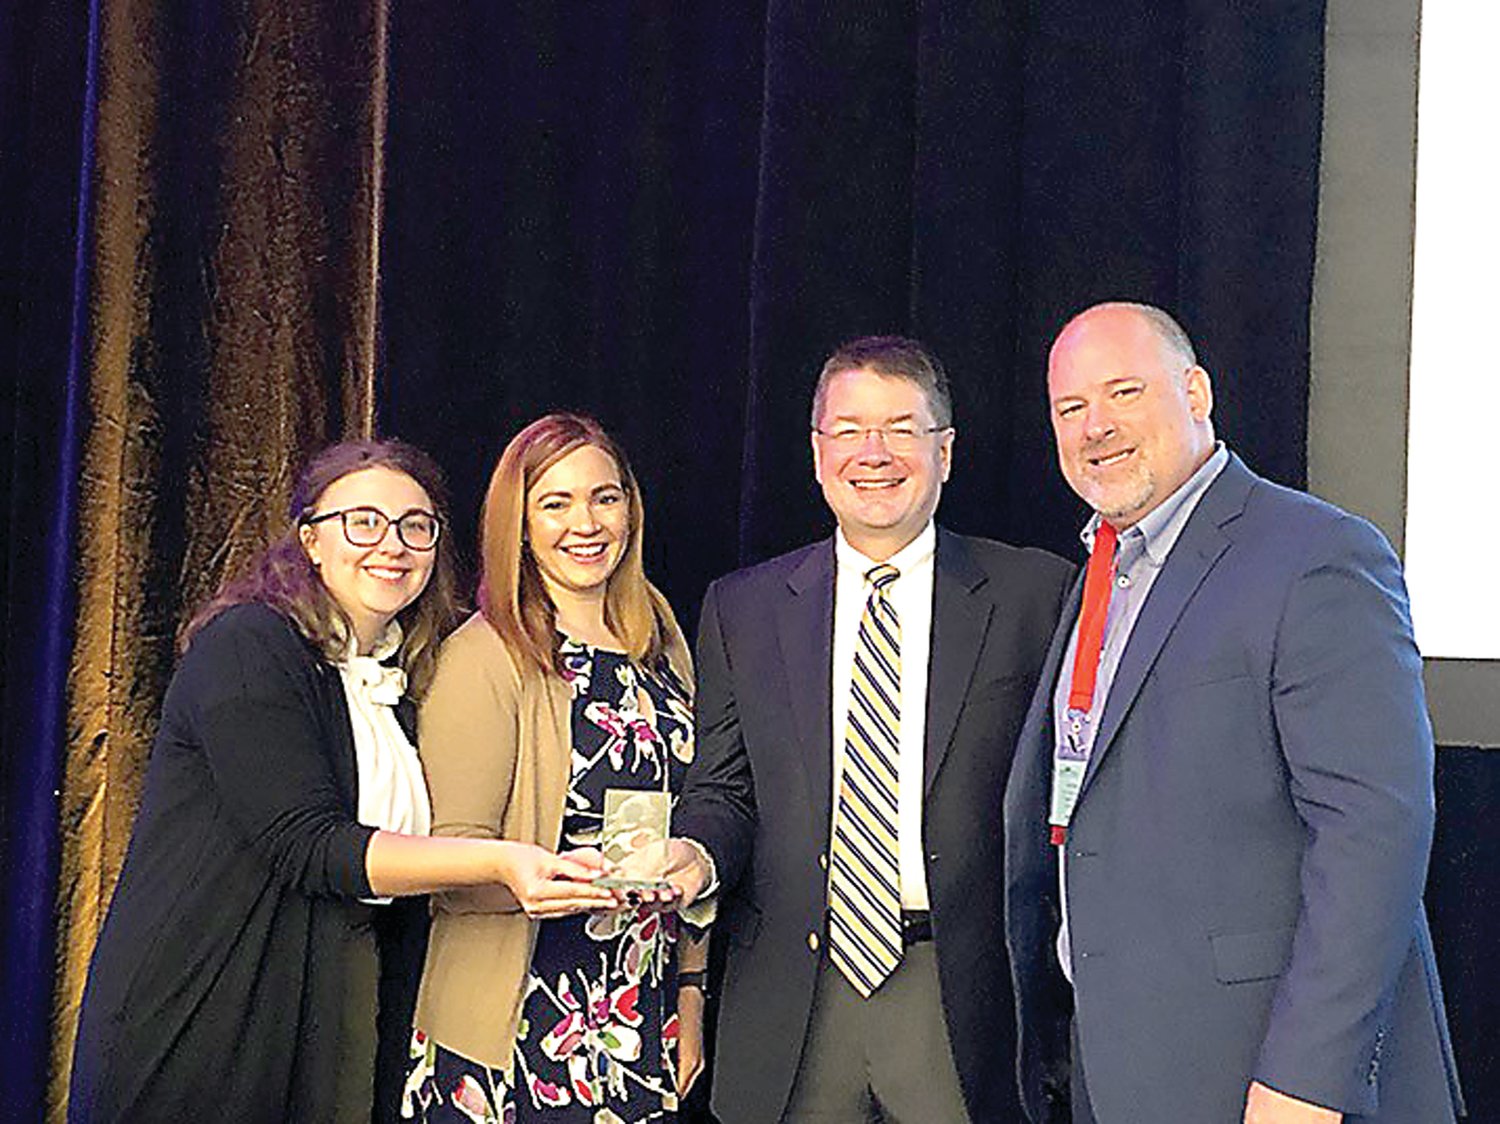 Representatives from Delaware Valley University accept the National Society for Experiential Education (NSEE) 2019 Outstanding Experiential Learning Program award. From left: Experience360 Advisor Emmaline Armstrong, Experience360 Program Director Darrah Mugrauer, Vice President for Academic Affairs Dr. Benjamin Rusiloski and President of the Board of Directors of NSEE Paul Kwant. Photograph by Delaware Valley University.